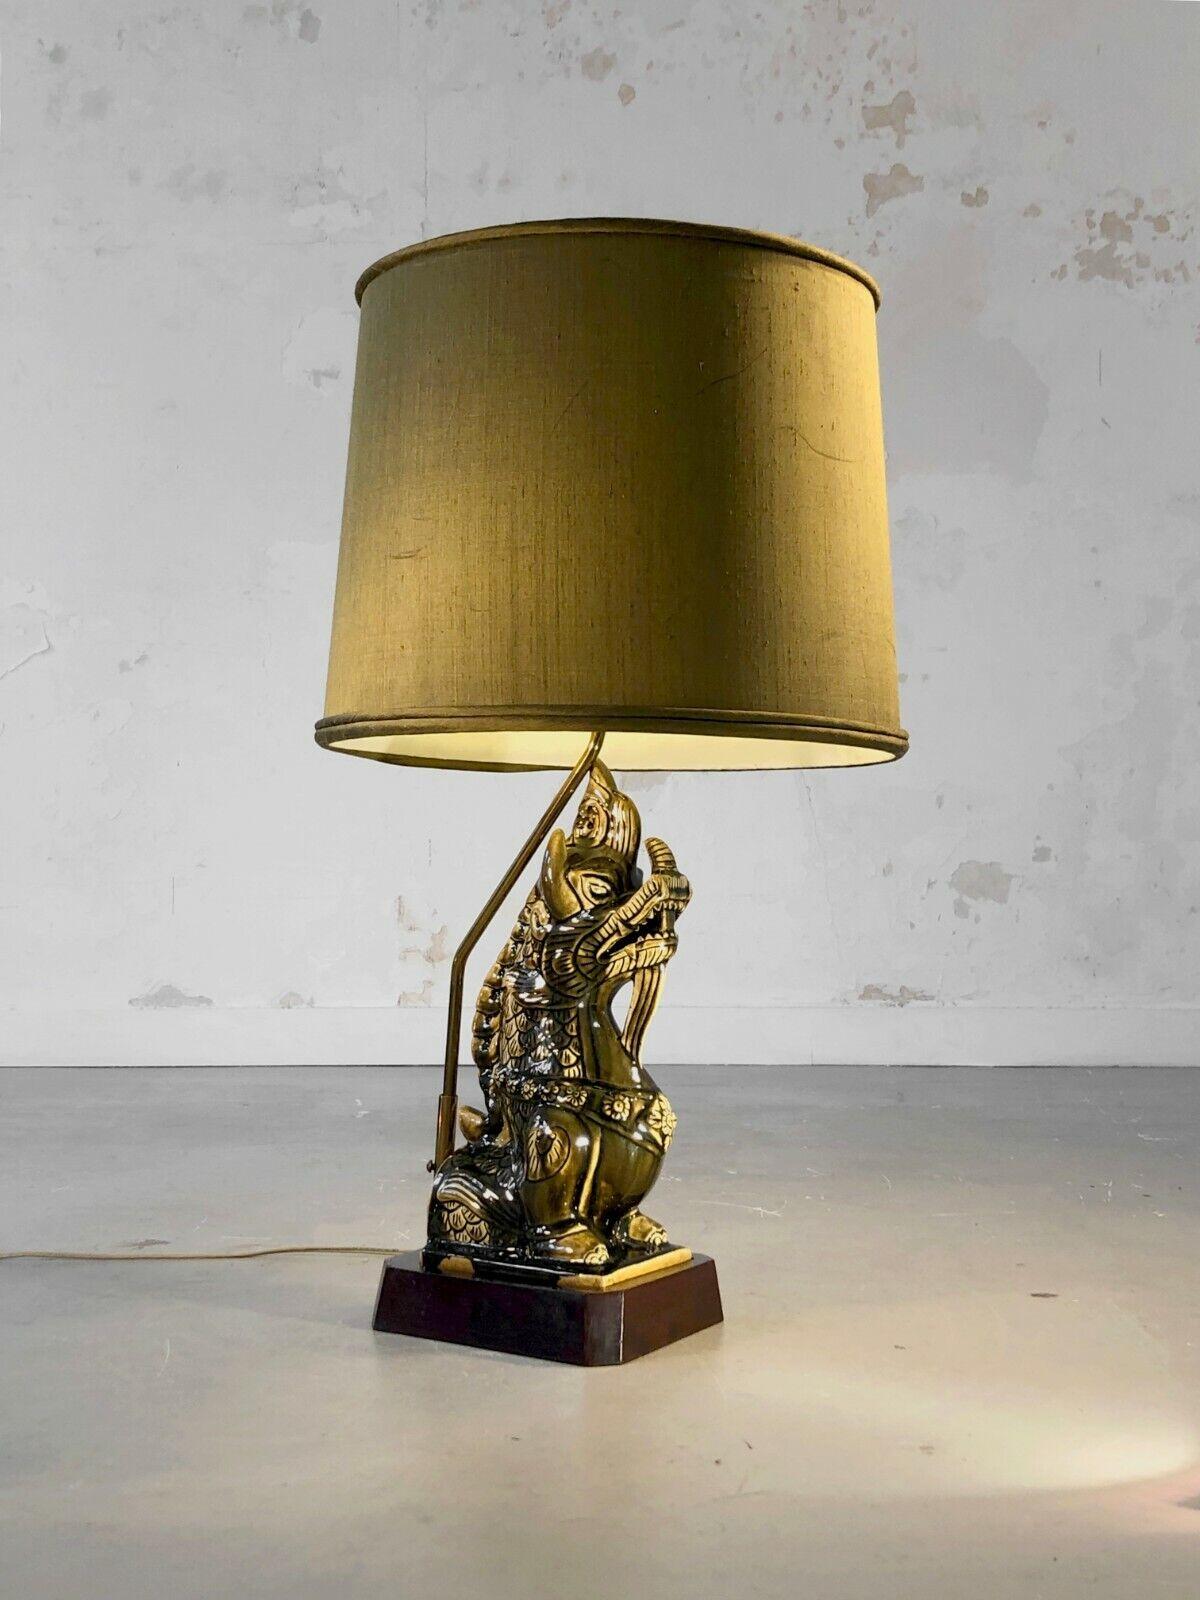 A spectacular, very large and massive dragon table lamp, Chinese, Orientalist, Shabby-Chic, Zoomorphic, thick wooden base, important dragon sculpture in khaki green enameled ceramic, large original circular lampshade in khaki fabrics, to be